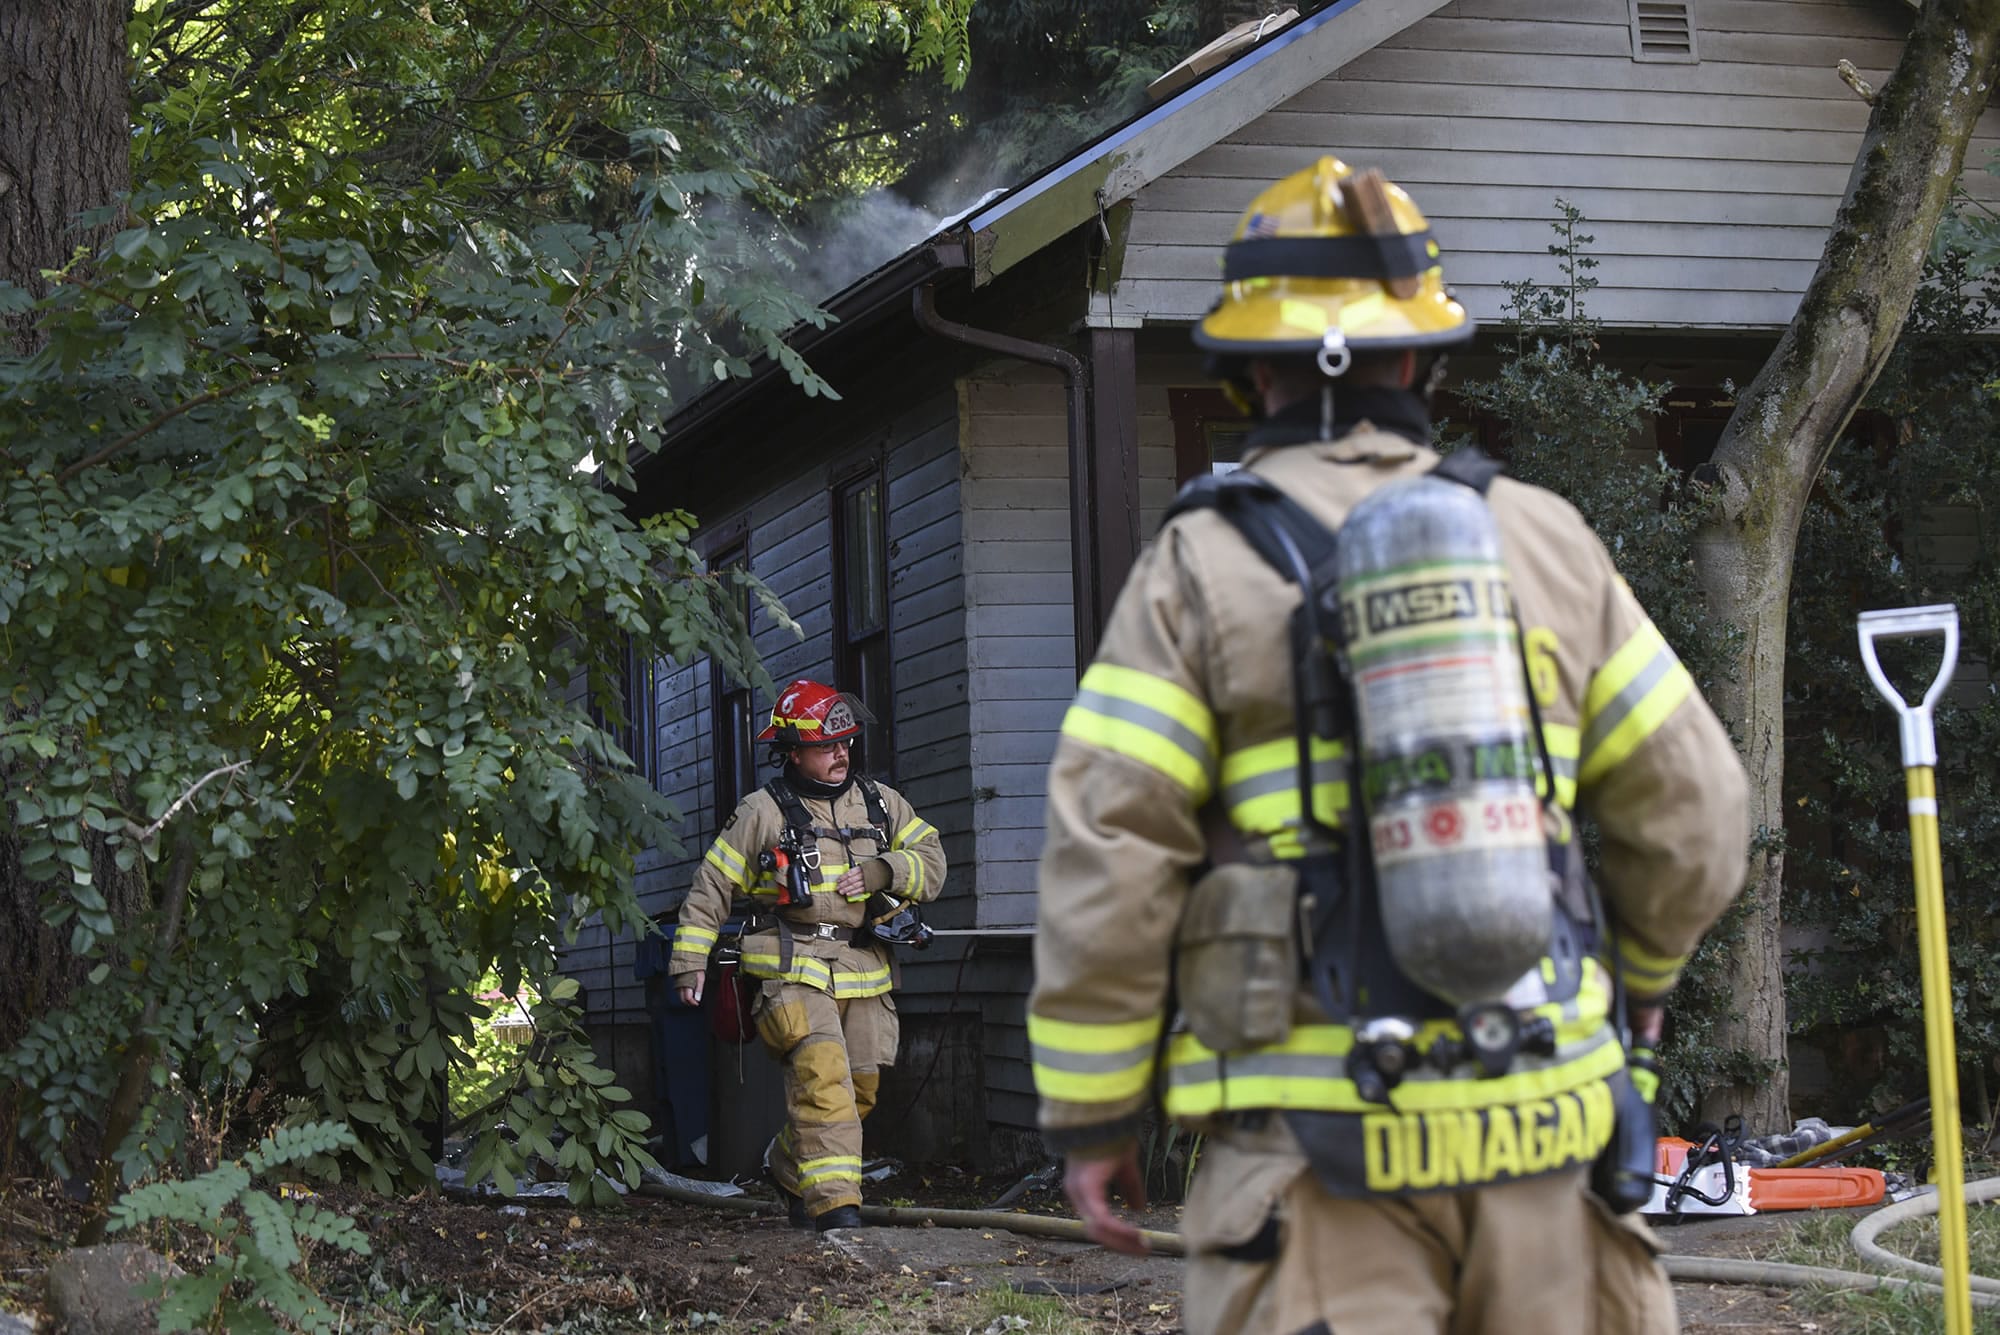 A firefighter emerges from the back of a home that caught fire in the Hough Neighborhood, Monday afternoon, October 9, 2017.